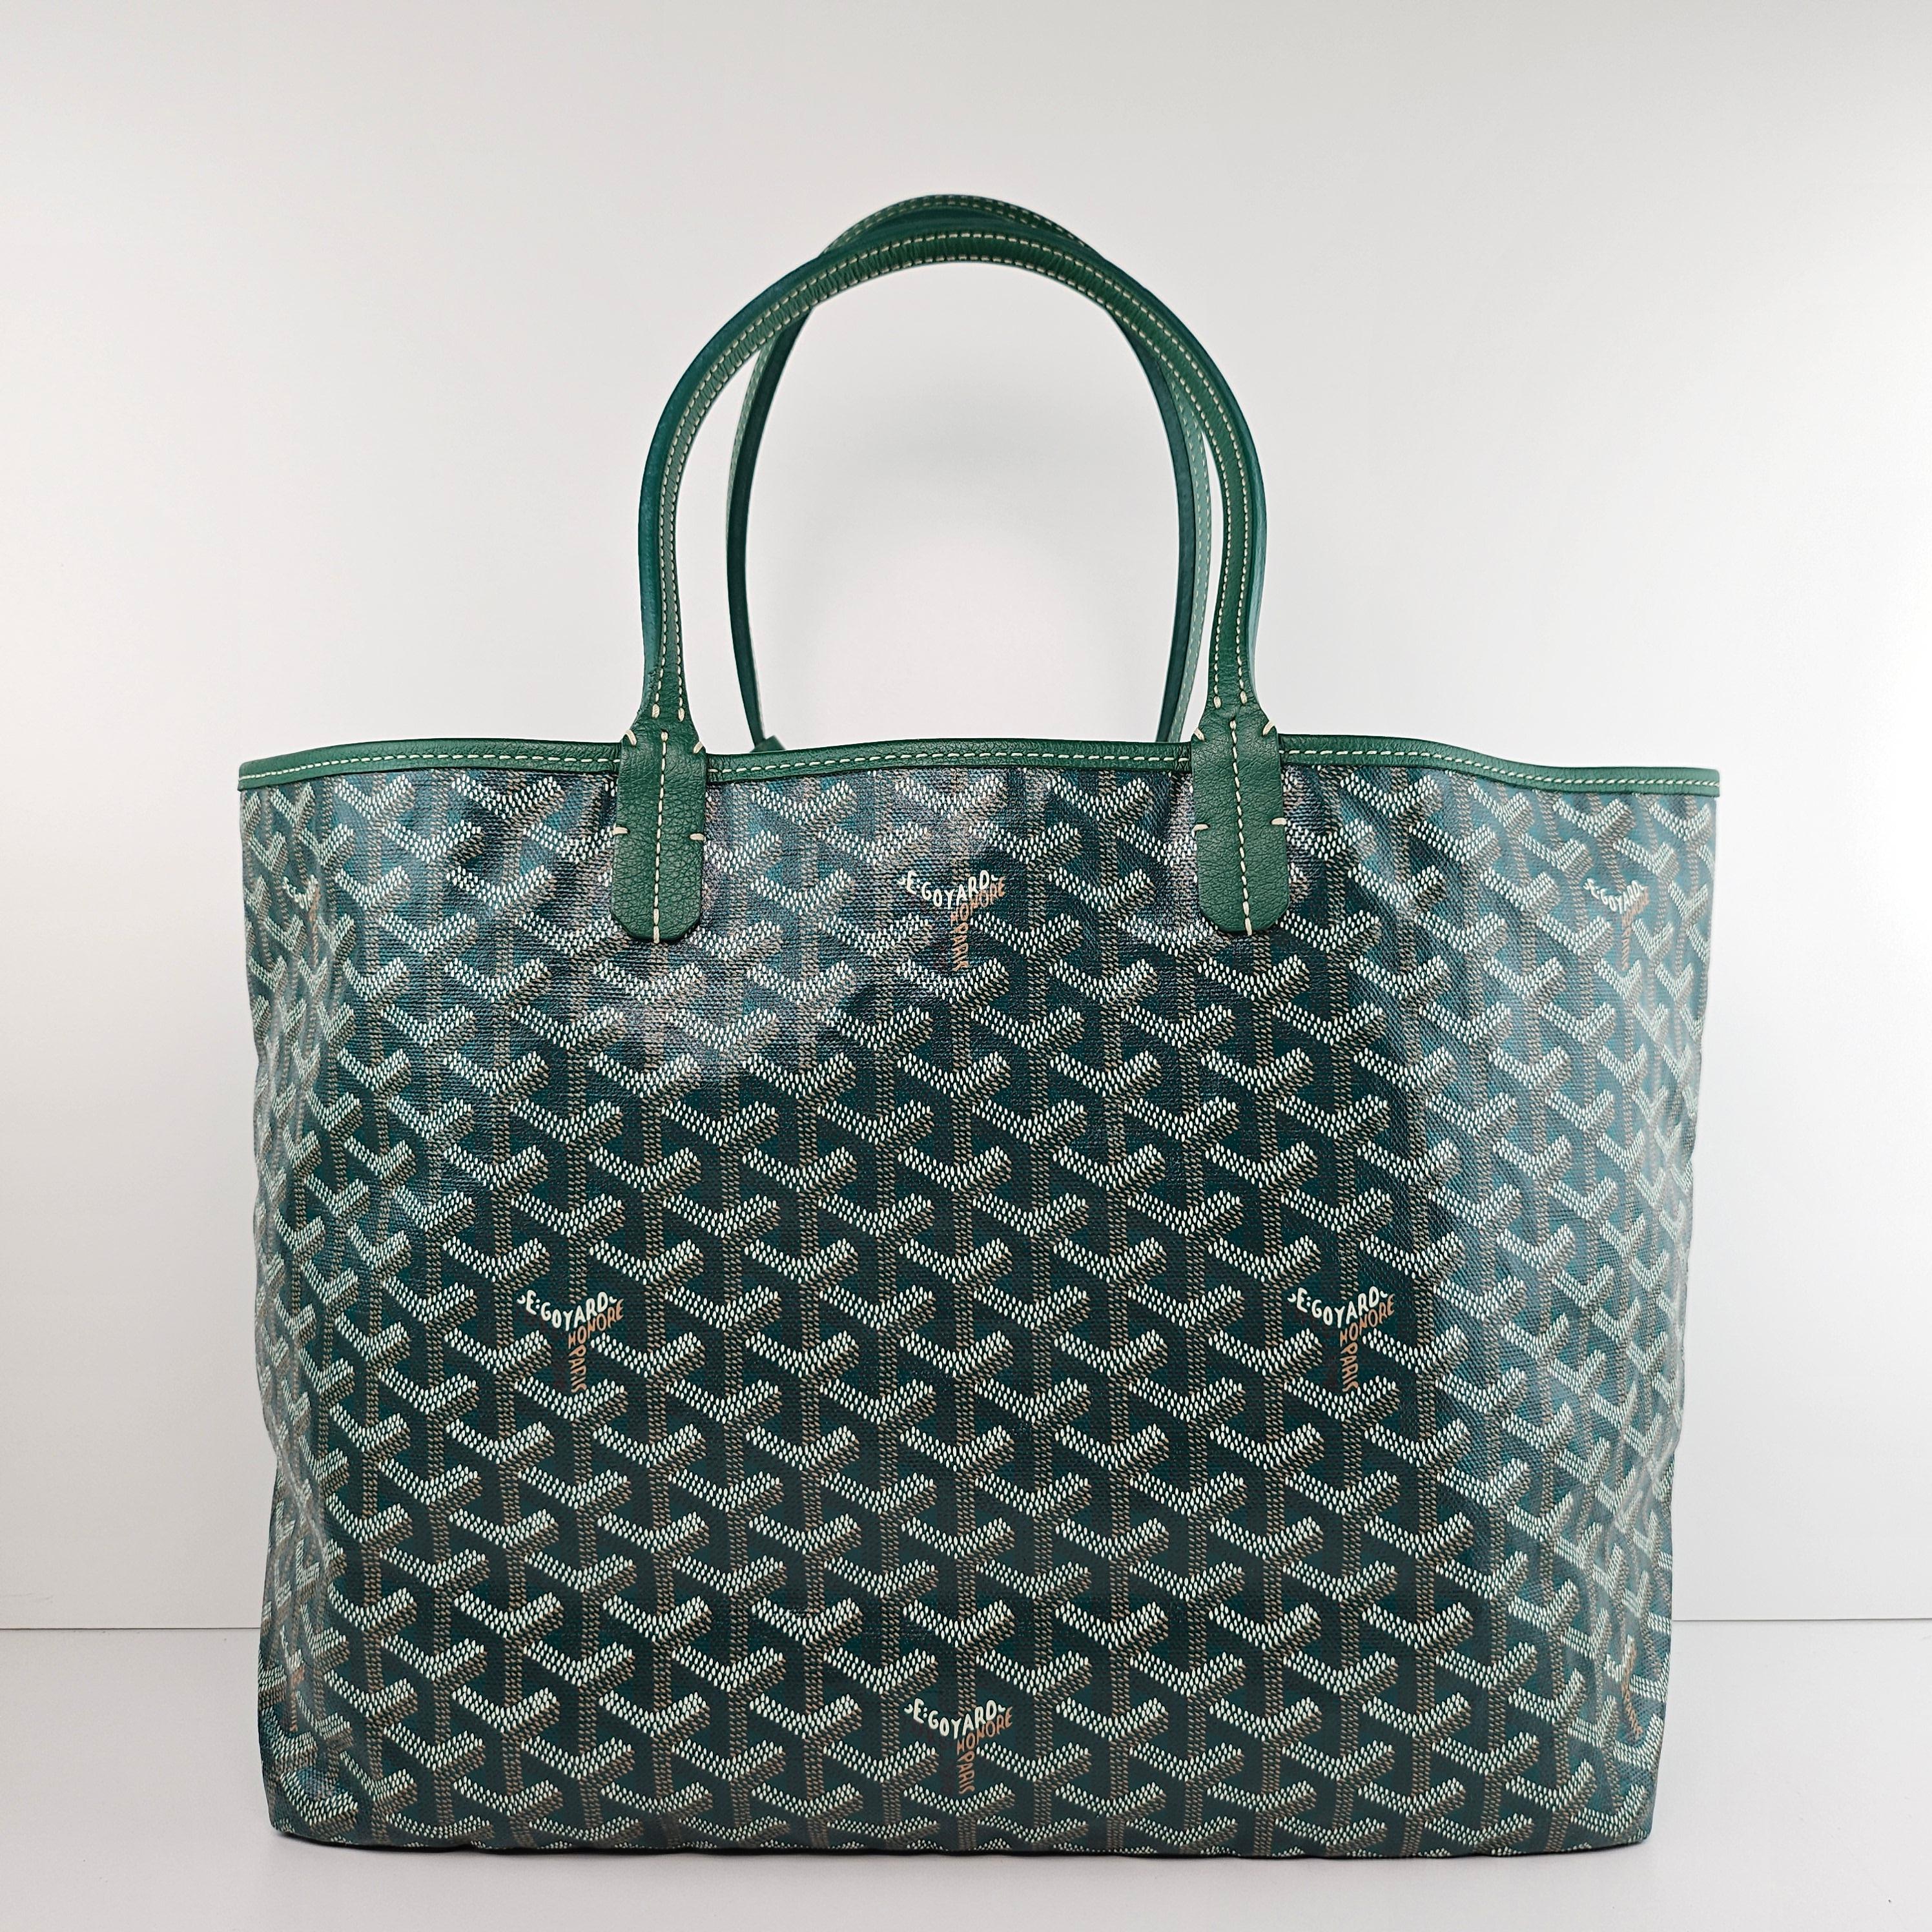 Condition: This authentic Goyard tote is in great pre-loved condition. There are faint interior marks, minor cracking on base straps, and light corner wear.

No accessories included (dust bag, box, etc.)

Features: Sturdy leather strap handles,